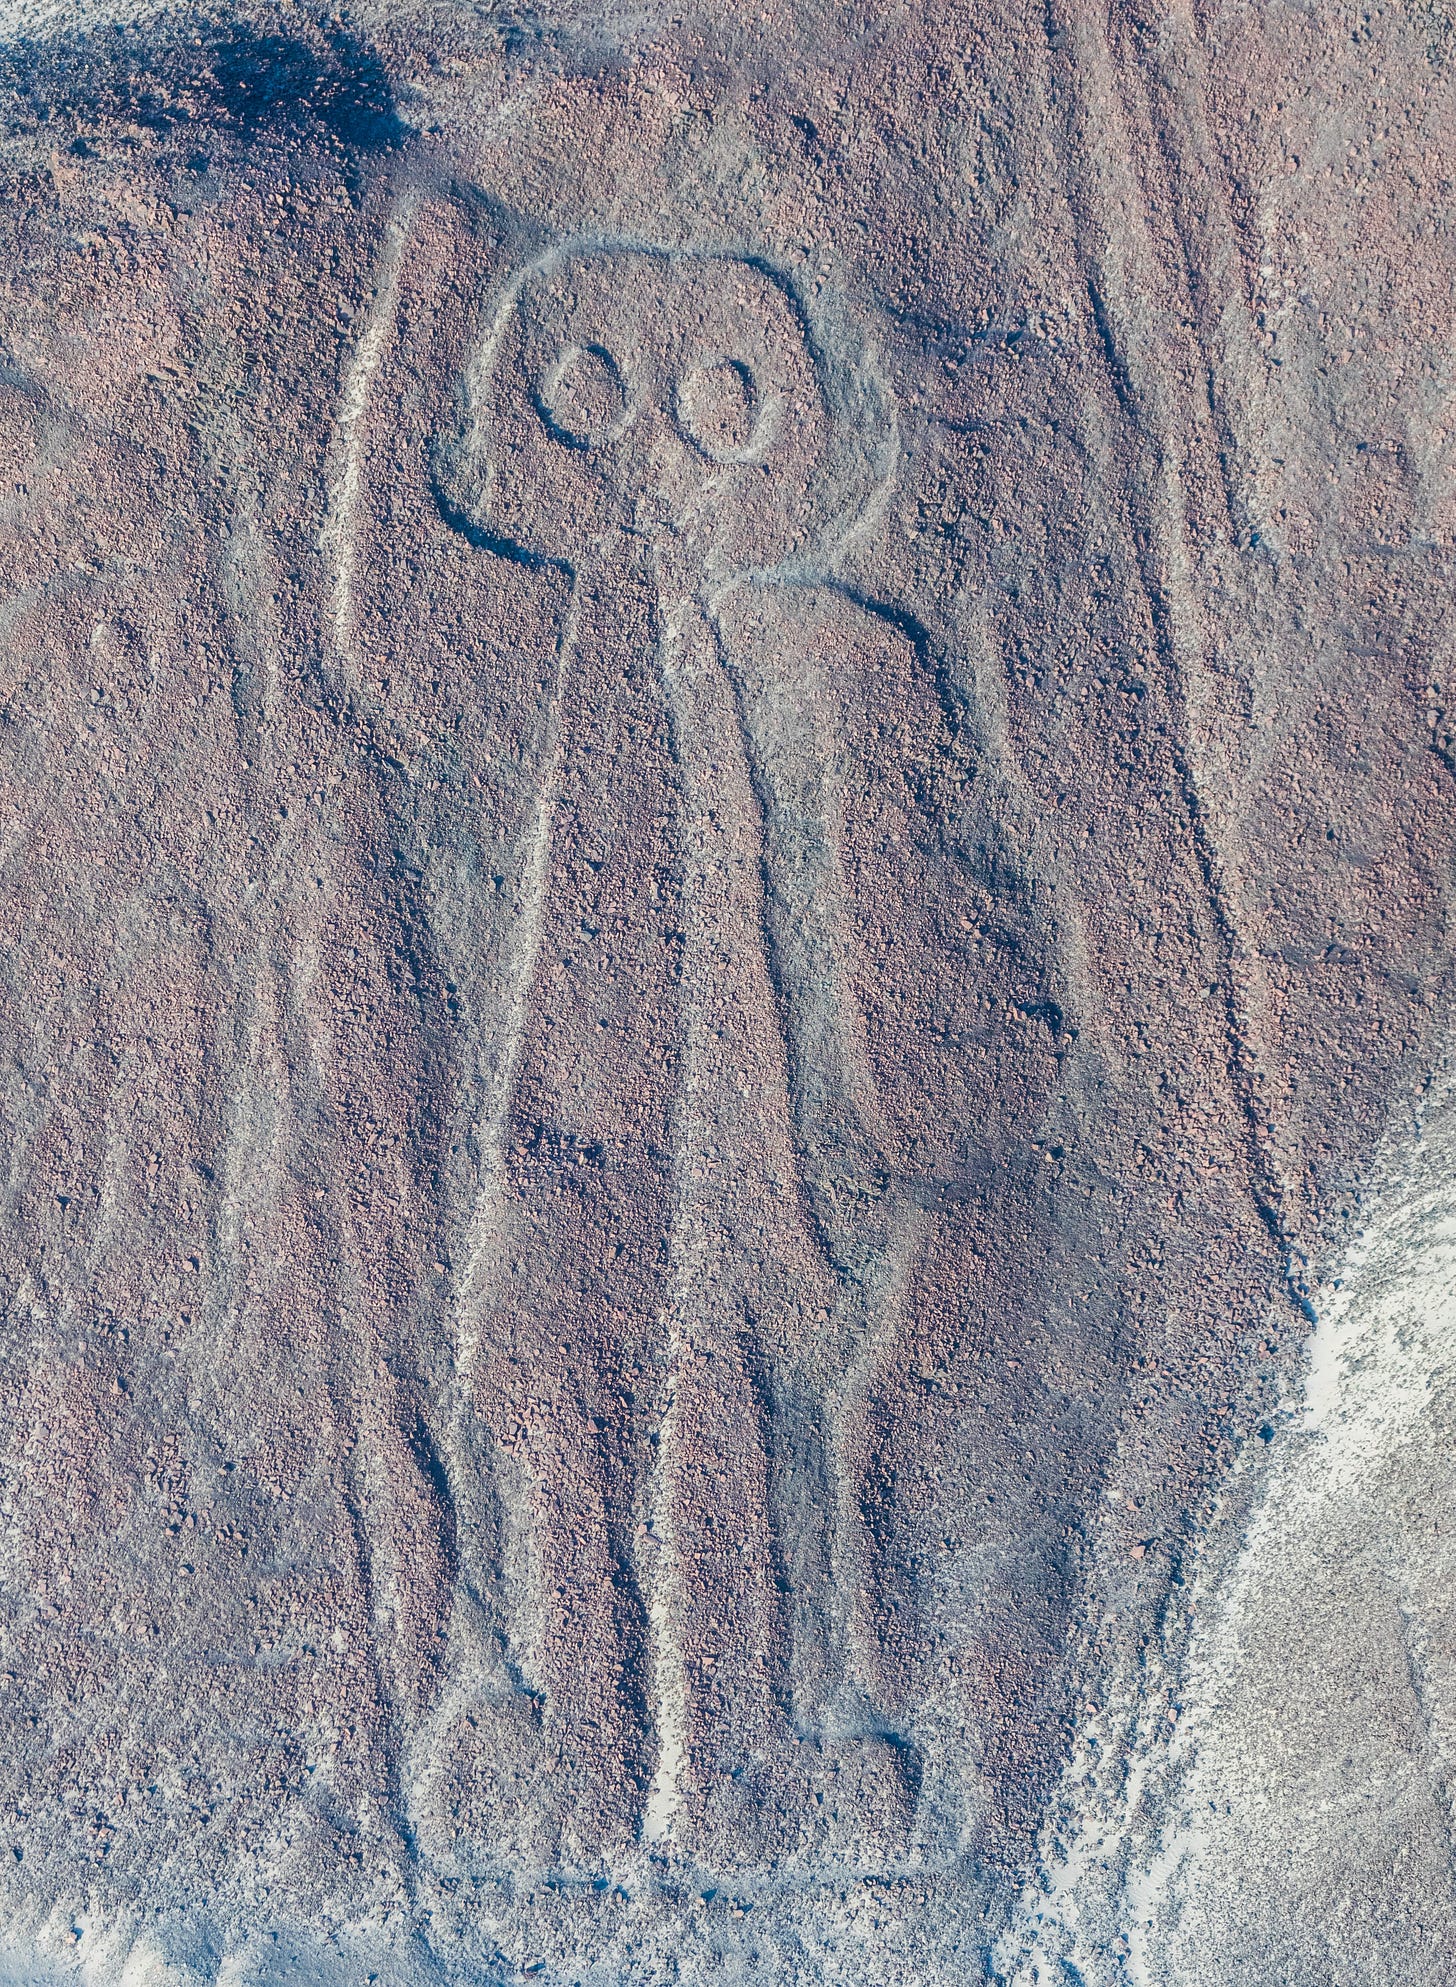 Aerial photo of one of the Nazca Geoglyphs, which looks like a simple drawing of a human waving.